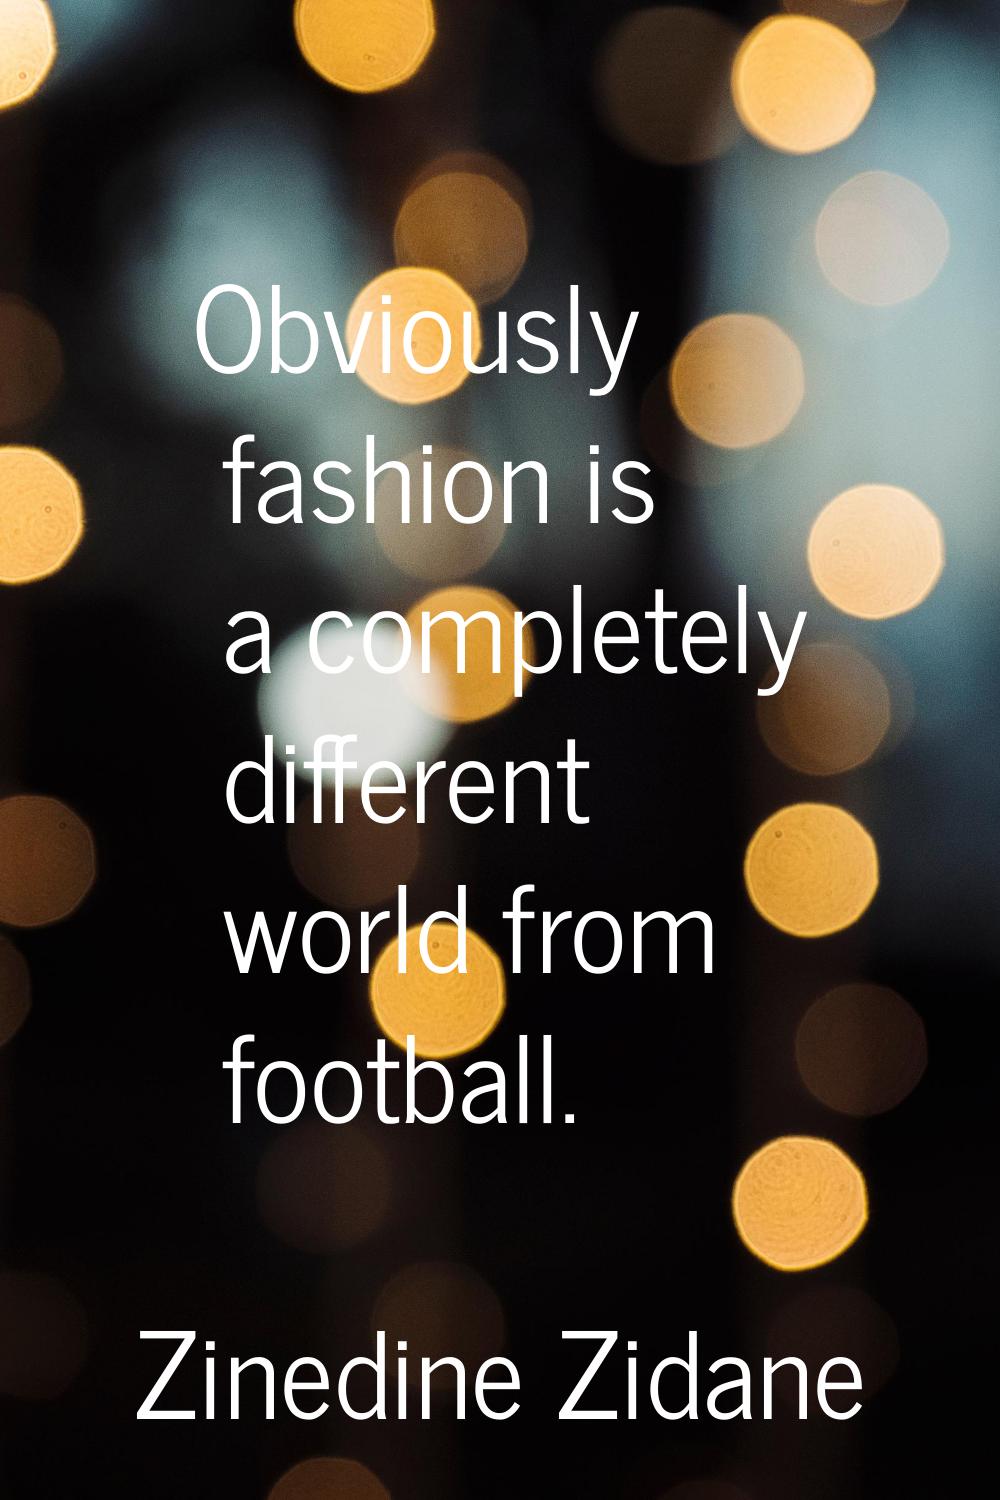 Obviously fashion is a completely different world from football.